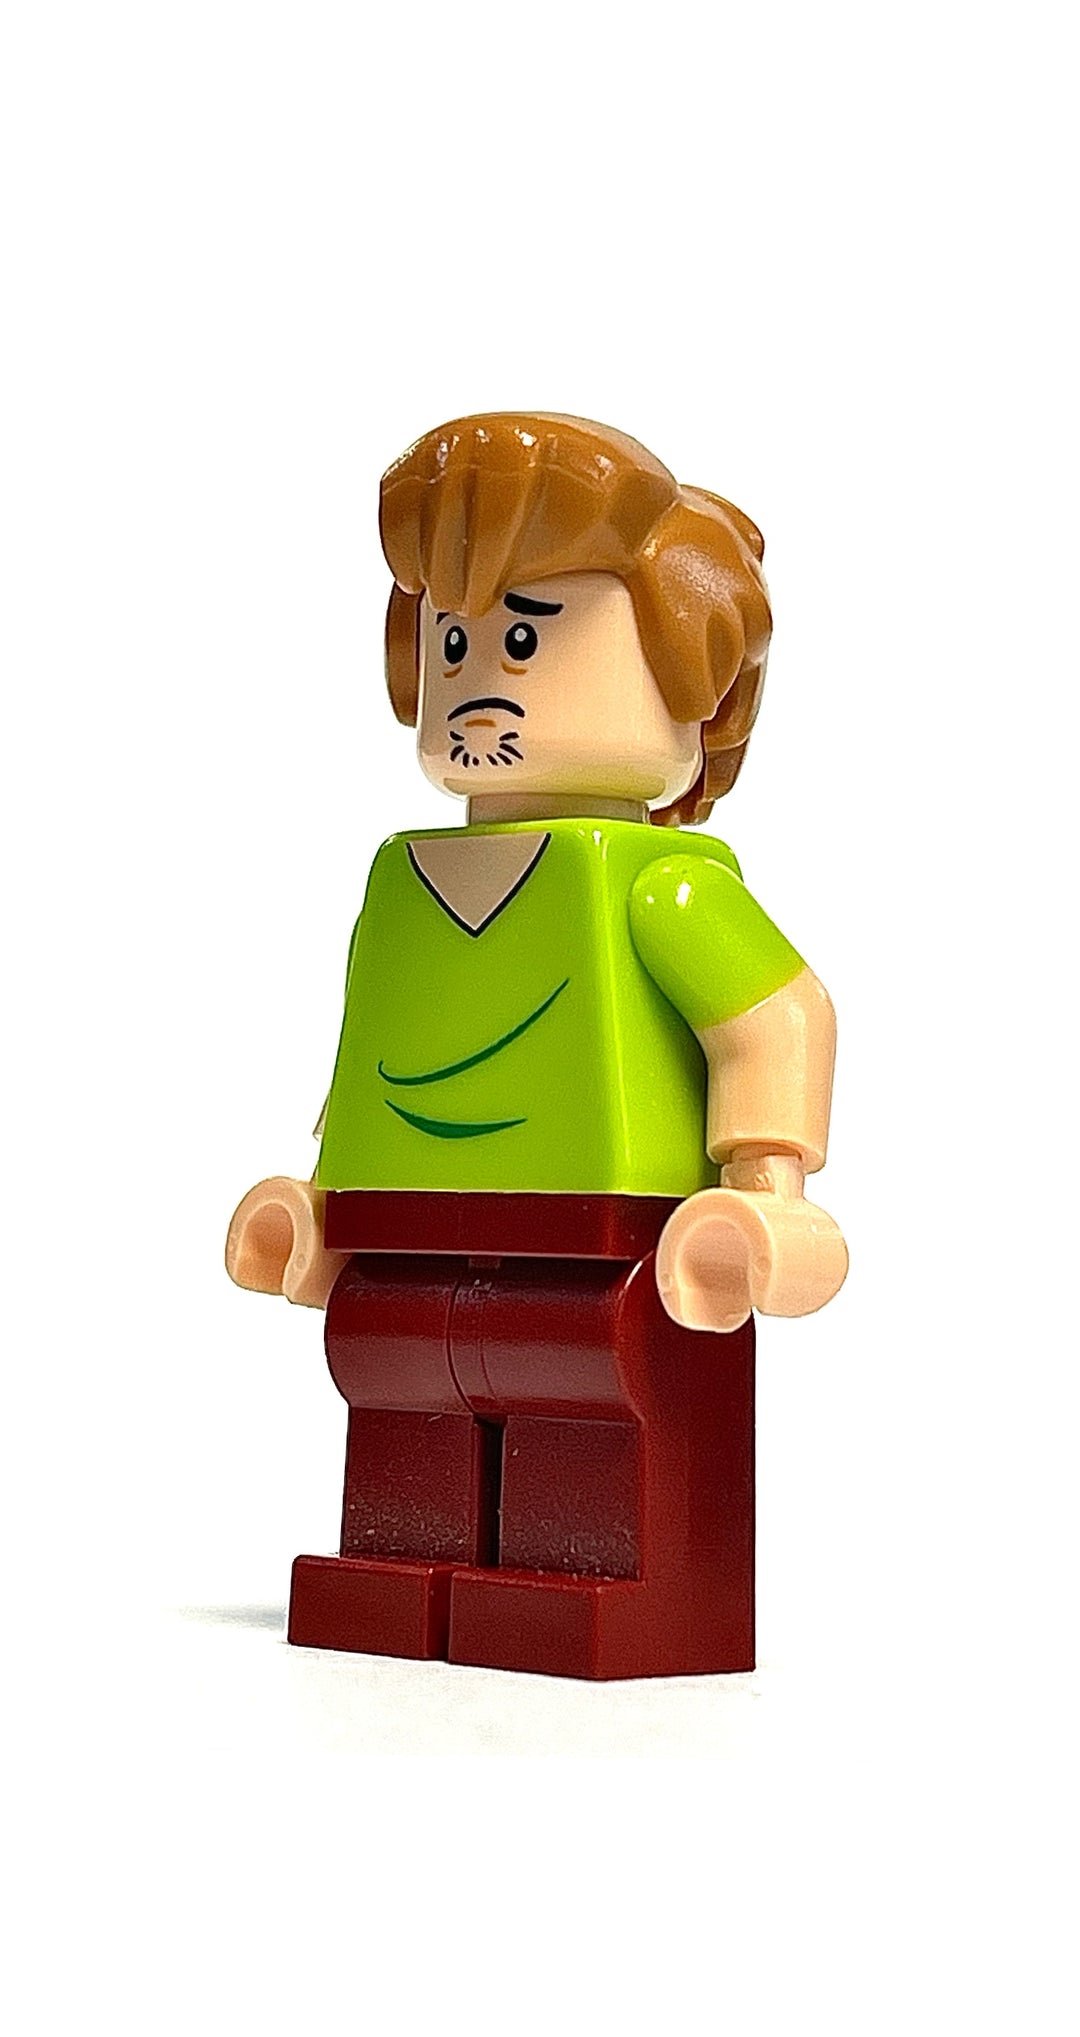 Shaggy Rogers - Open Mouth Grin, scd003